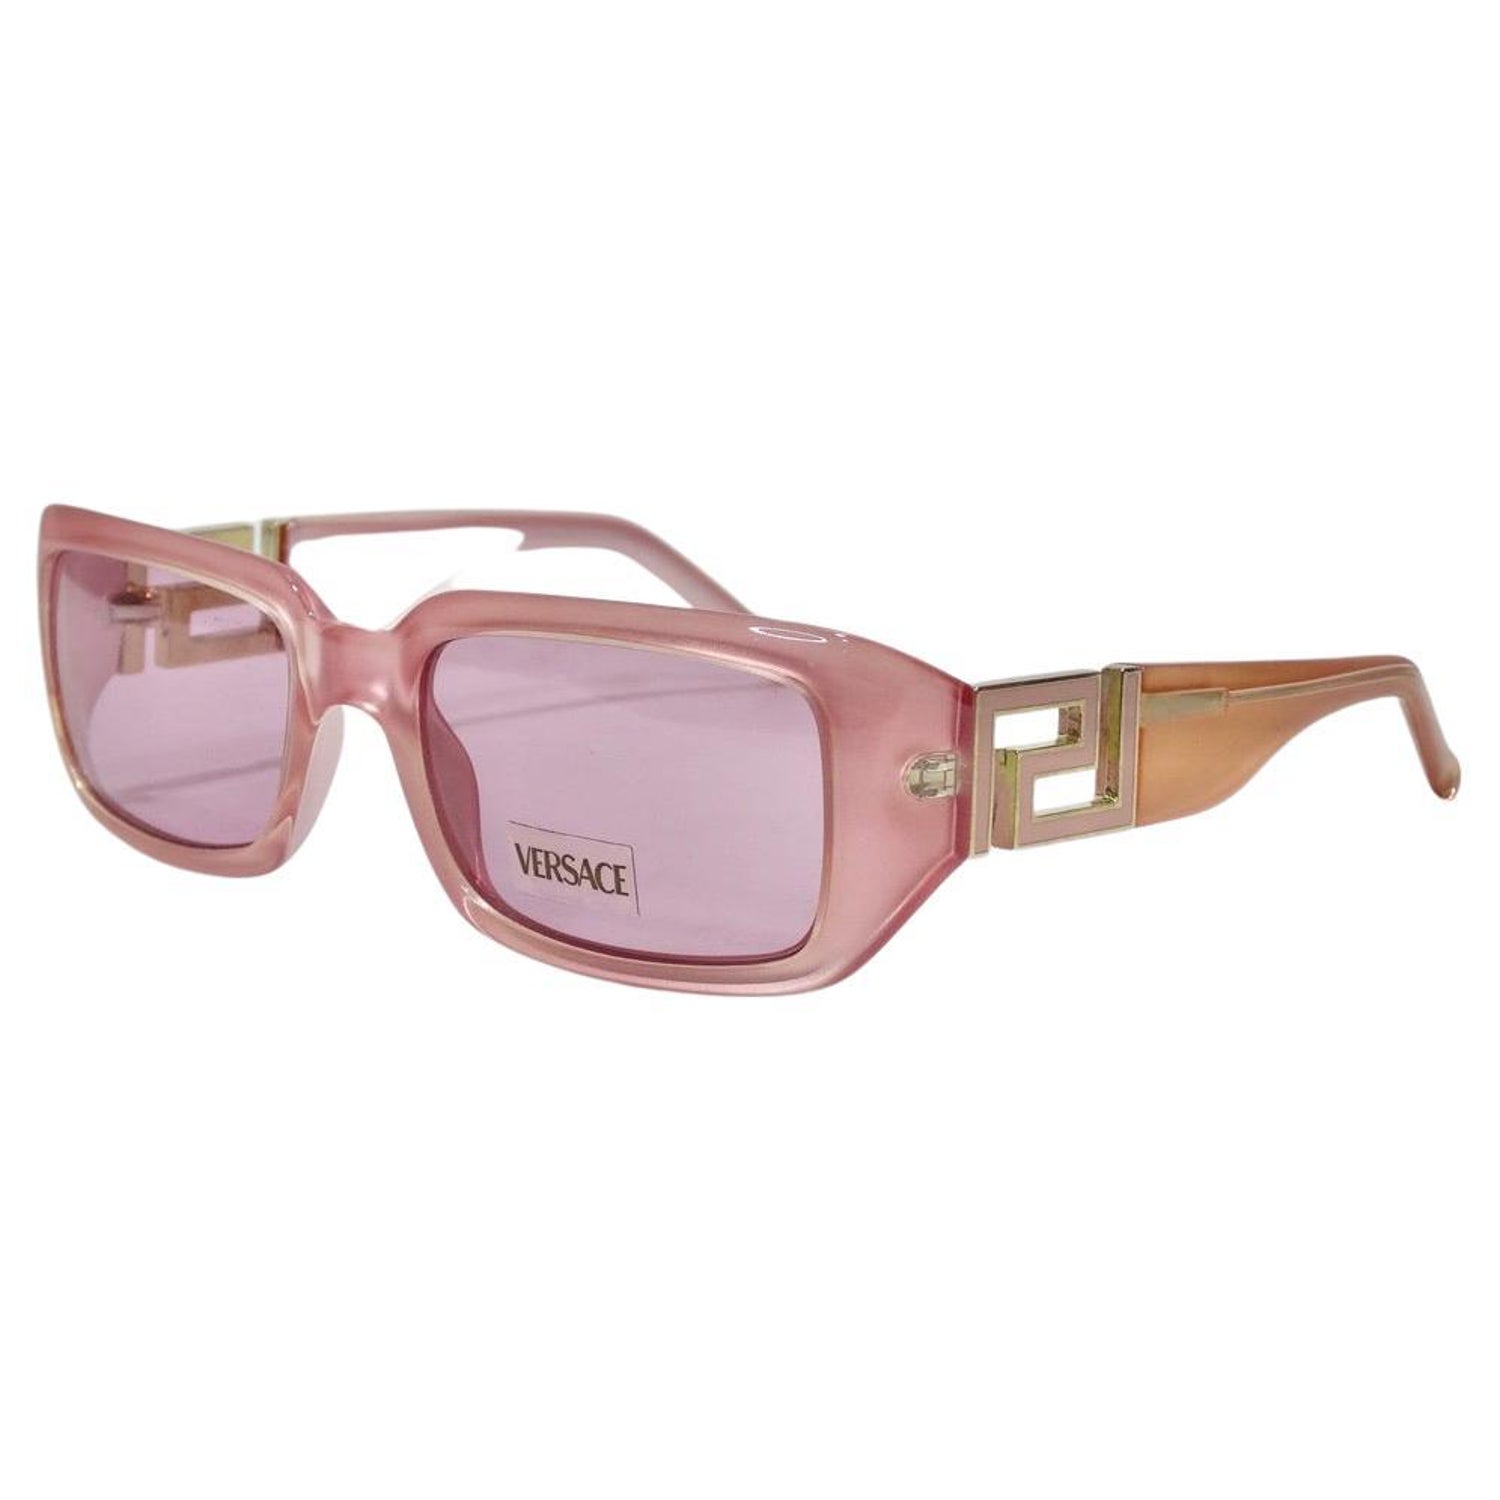 Louis Vuitton Lily Sunglasses Gold Pink Swarovski Crystal Limited Edition  RARE!